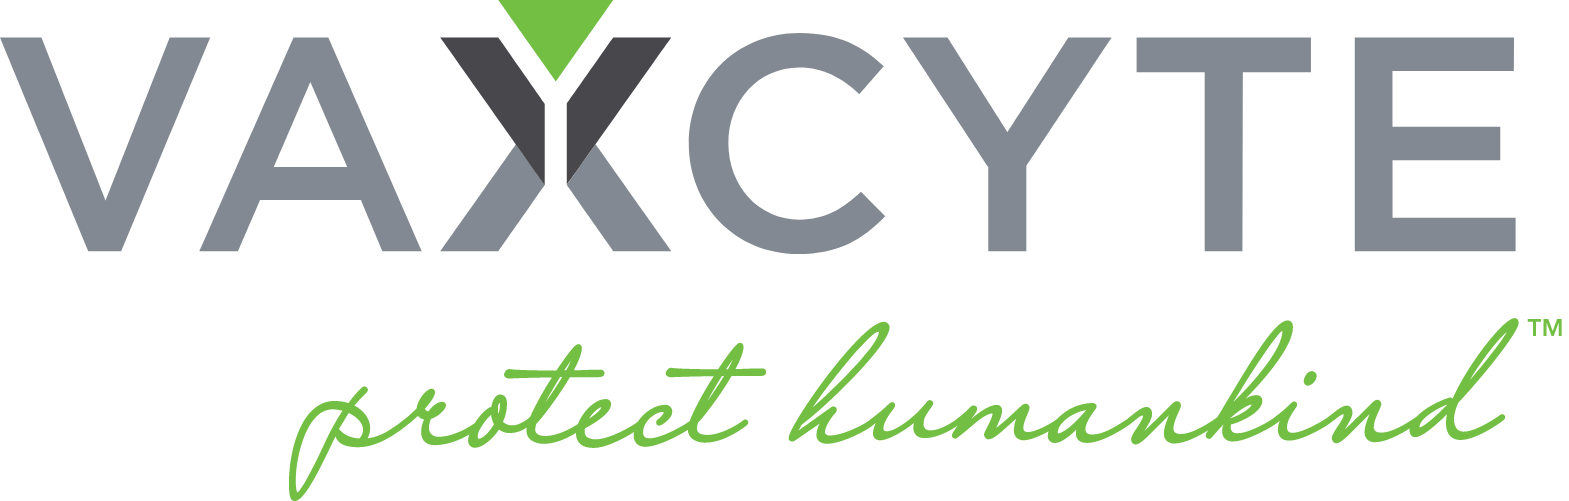 Vaxcyte
 logo large (transparent PNG)